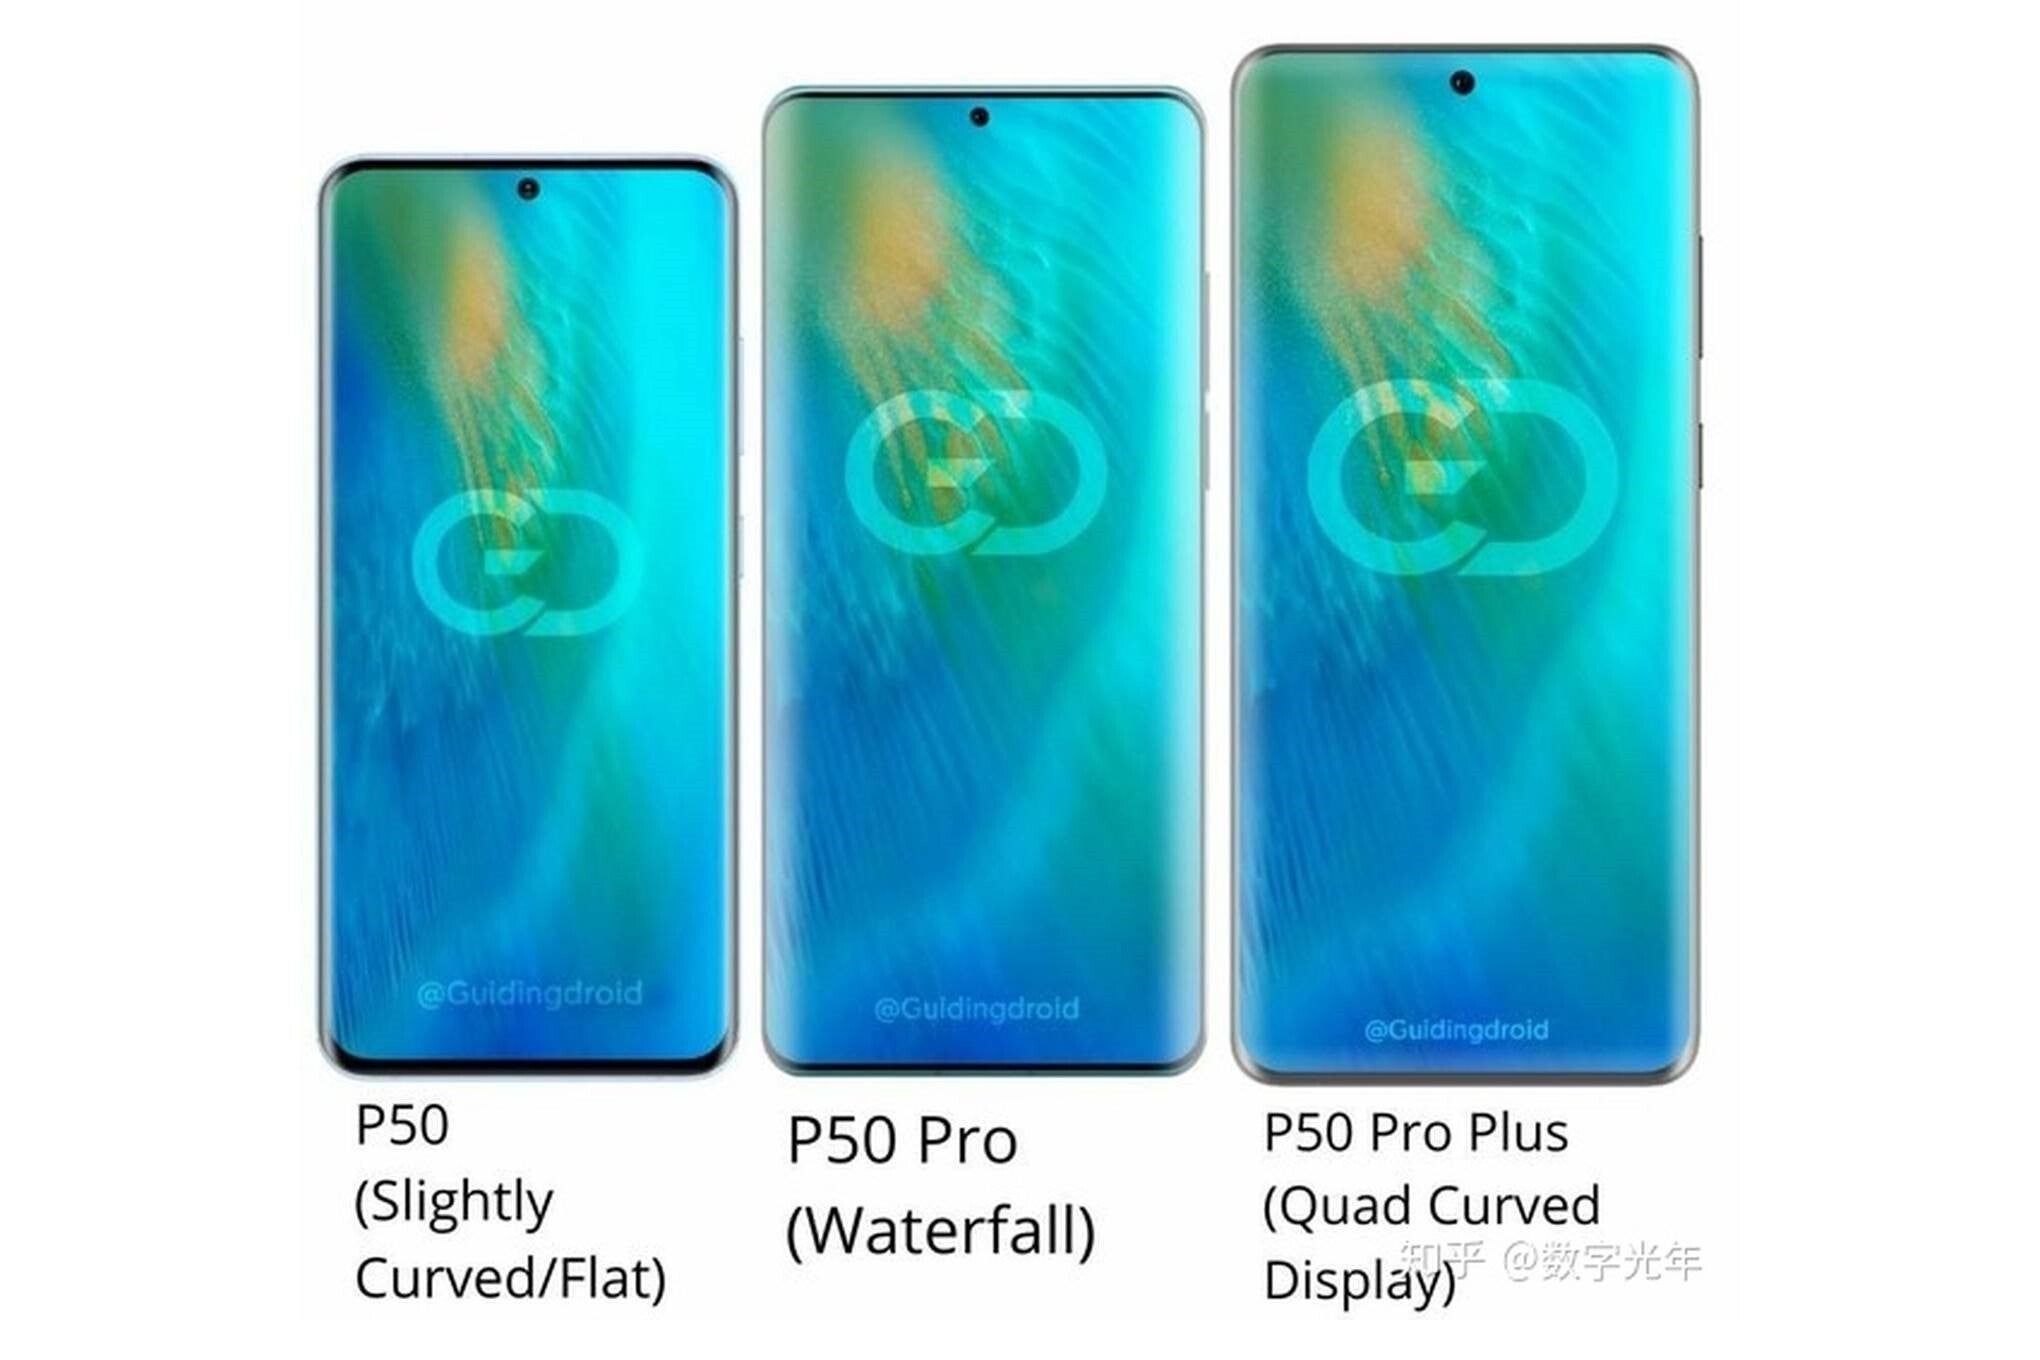 Huawei P50 series alleged design - Huawei P50 series will likely be unveiled towards the end of March